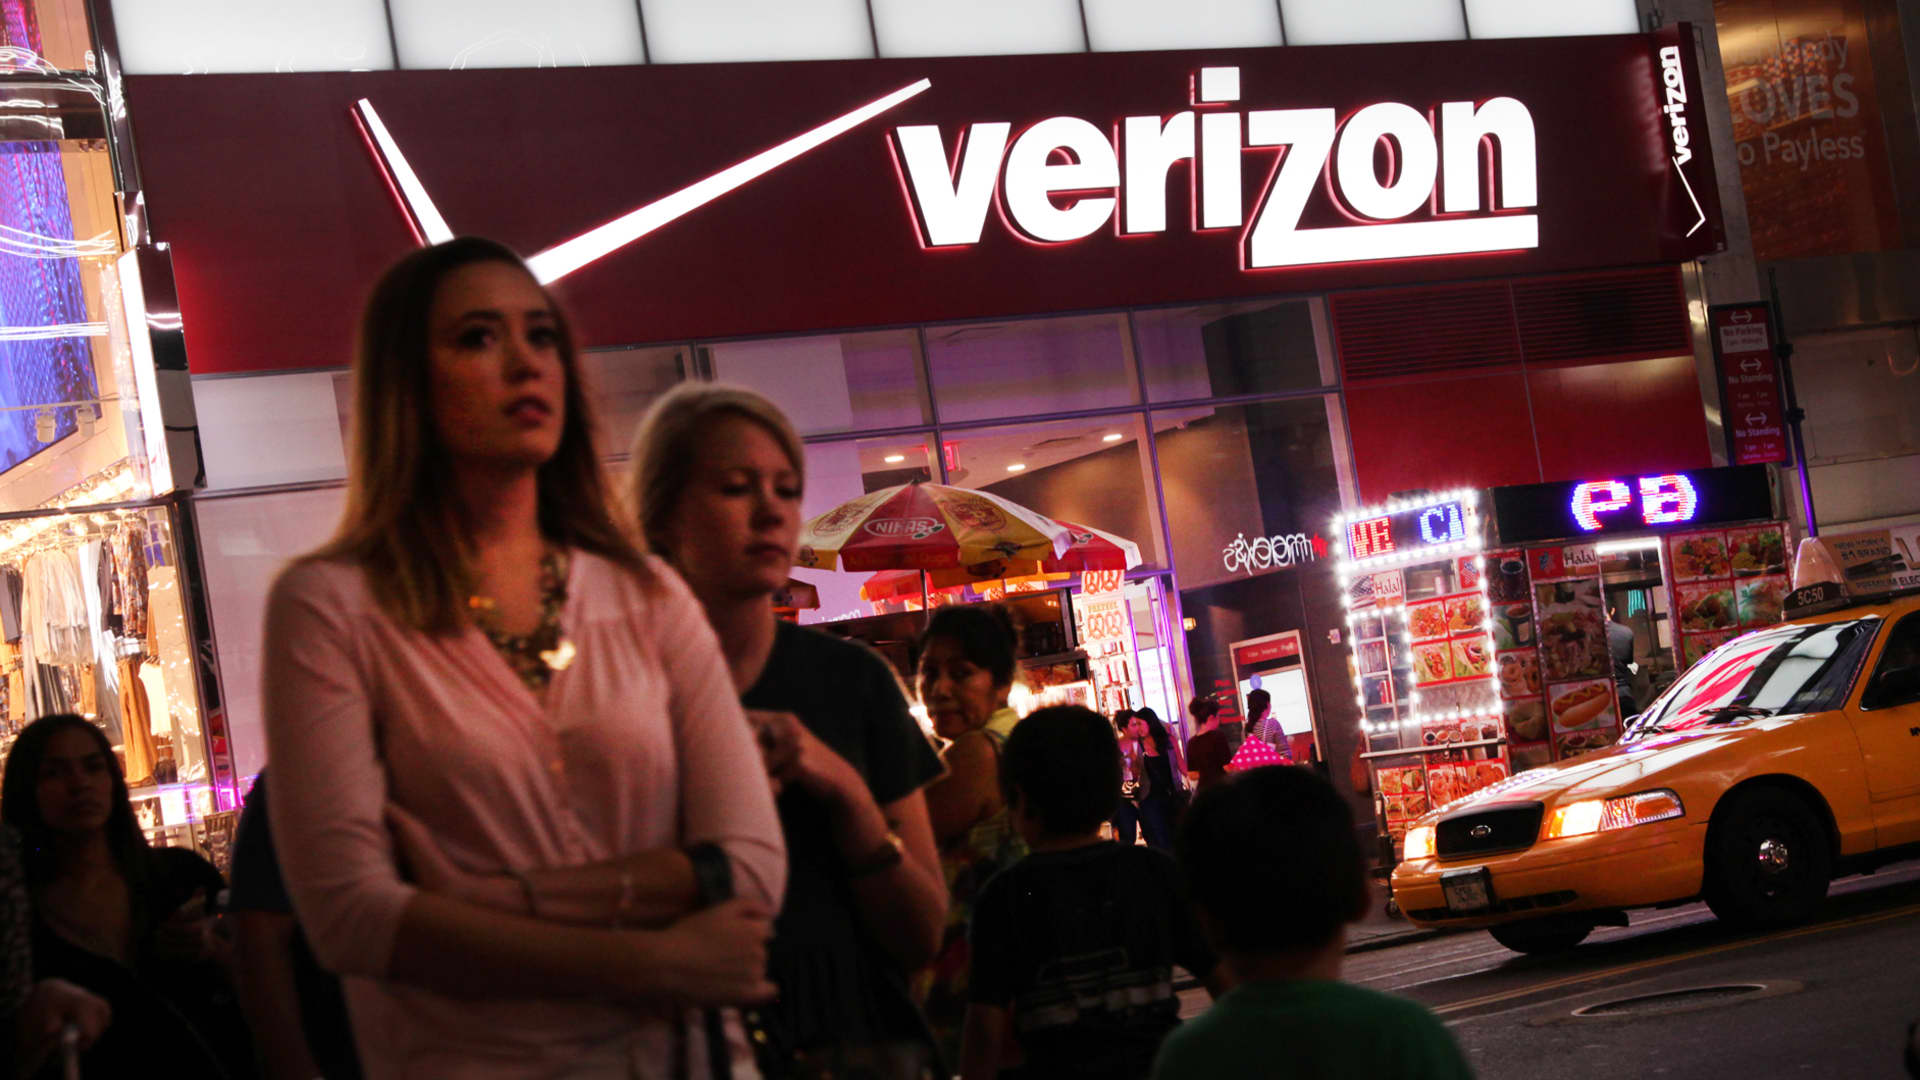 Verizon stock soars in direction of its handiest day in almost 15 years